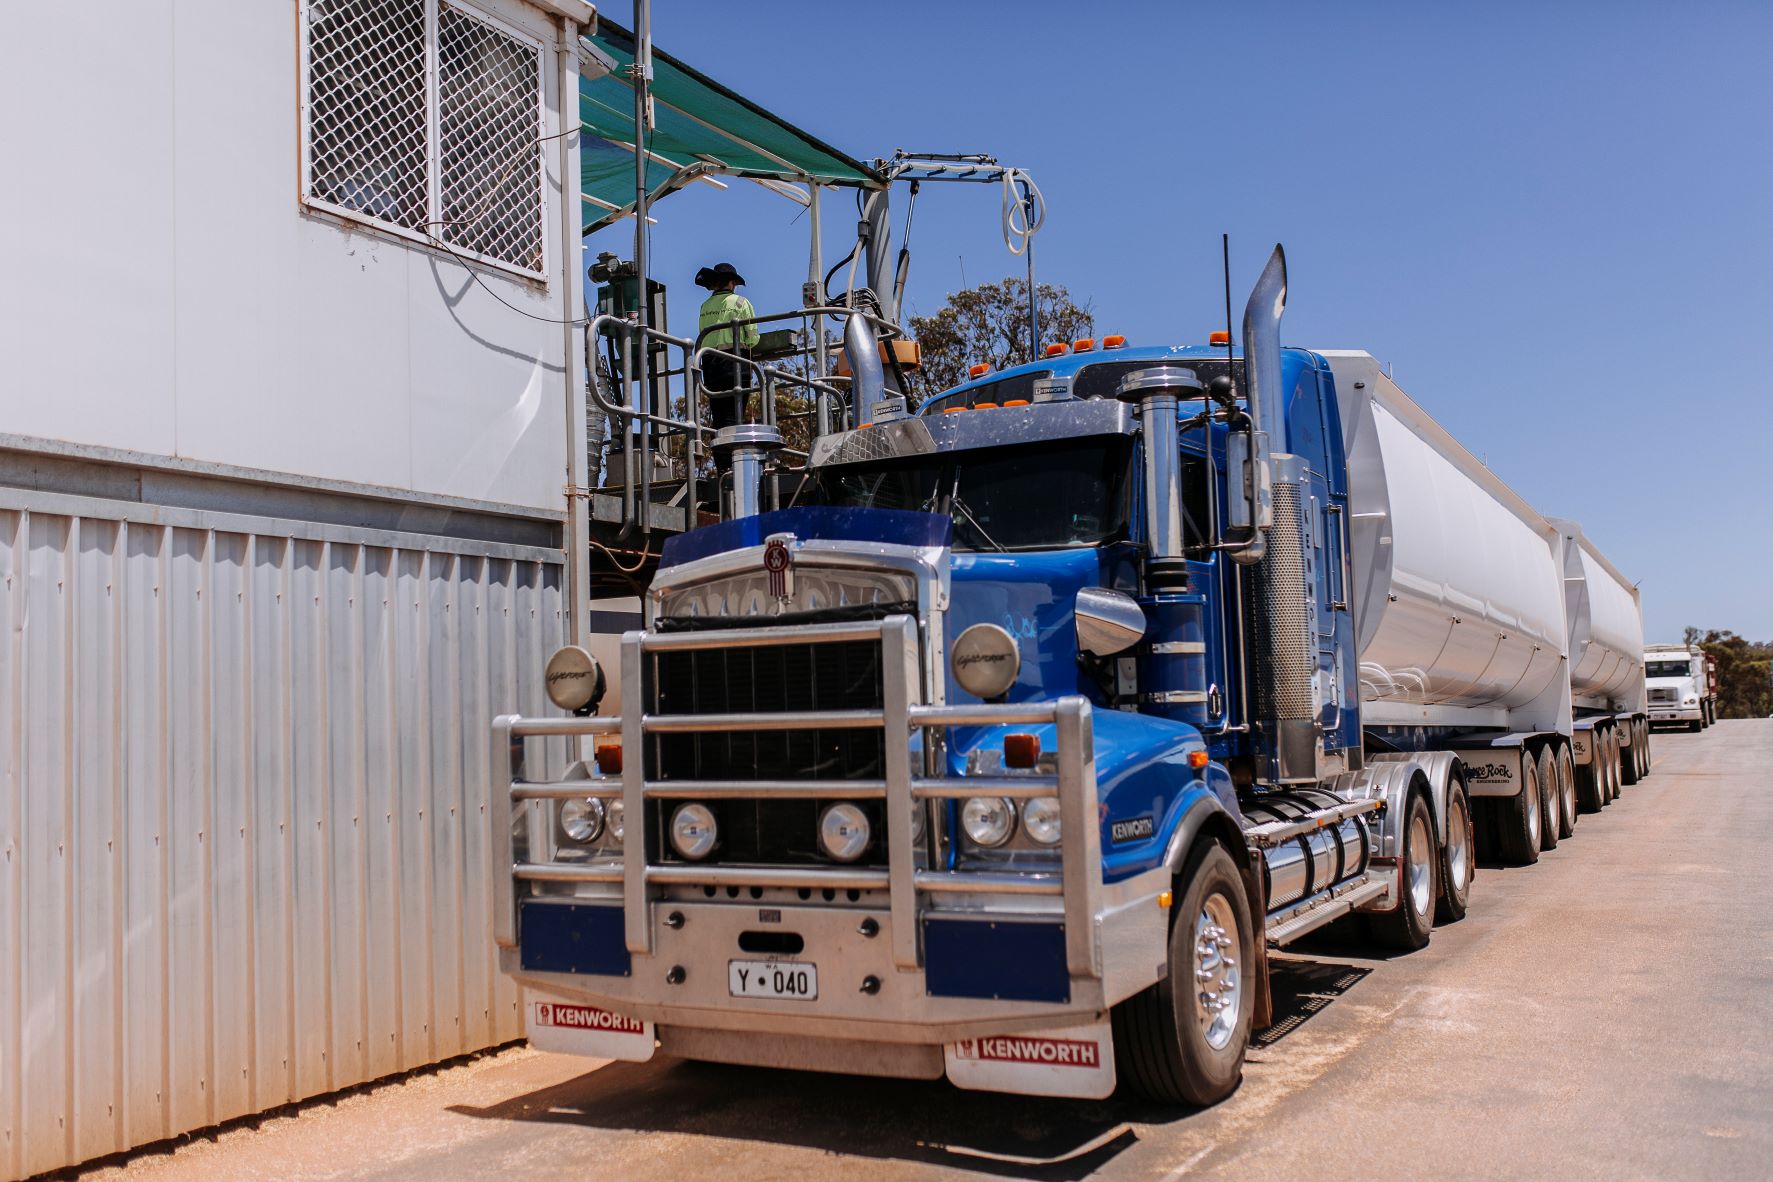 Truck delivering grain to CBH - CBH receival